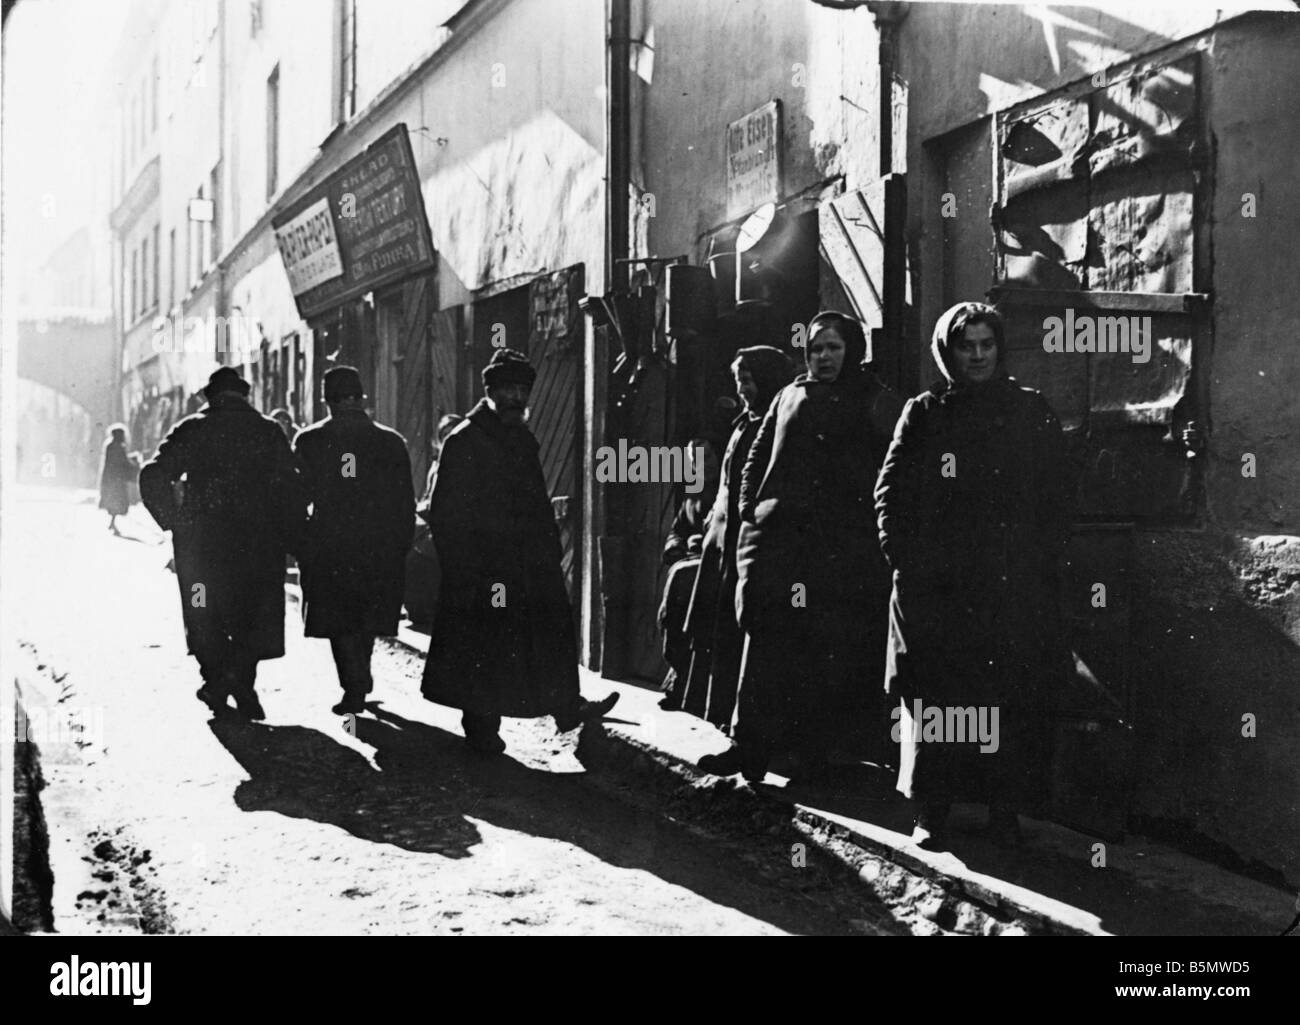 9IS 1916 0 0 A2 4 Jewish sector in Vilnius c 1916 History of Judaism Eastern Jews Jewish sector in Vilnius Street scene Amateur Stock Photo